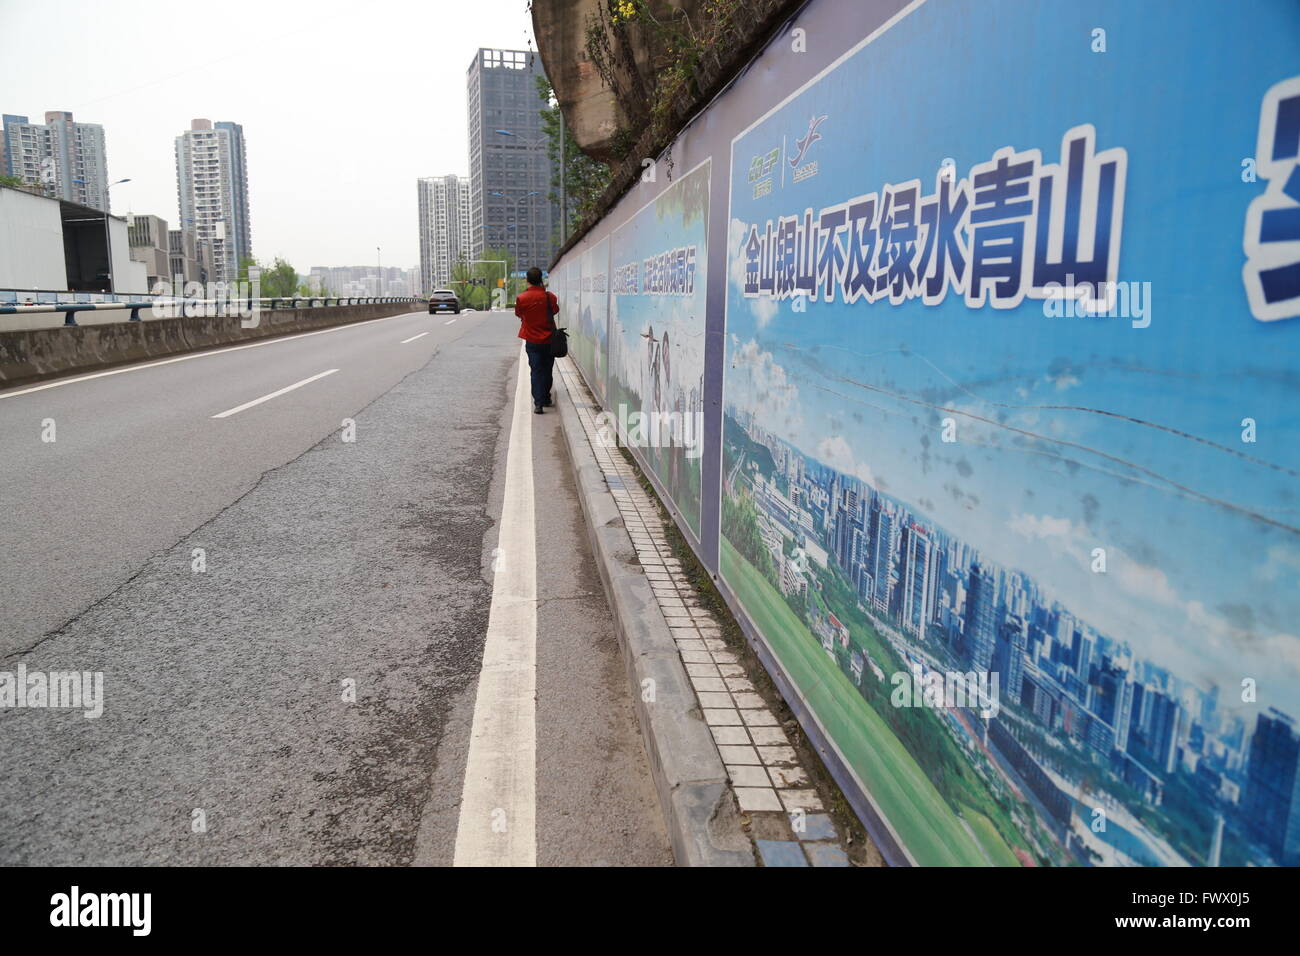 Chongqing, Chongqing, CHN. 5th Apr, 2016. Chongqing, CHINA - April 5 2016: (EDITORIAL USE ONLY. CHINA OUT) The narrowest sidewalk shows in Chongqing with a width of 37 cm, names 3 iPhone5s. © SIPA Asia/ZUMA Wire/Alamy Live News Stock Photo